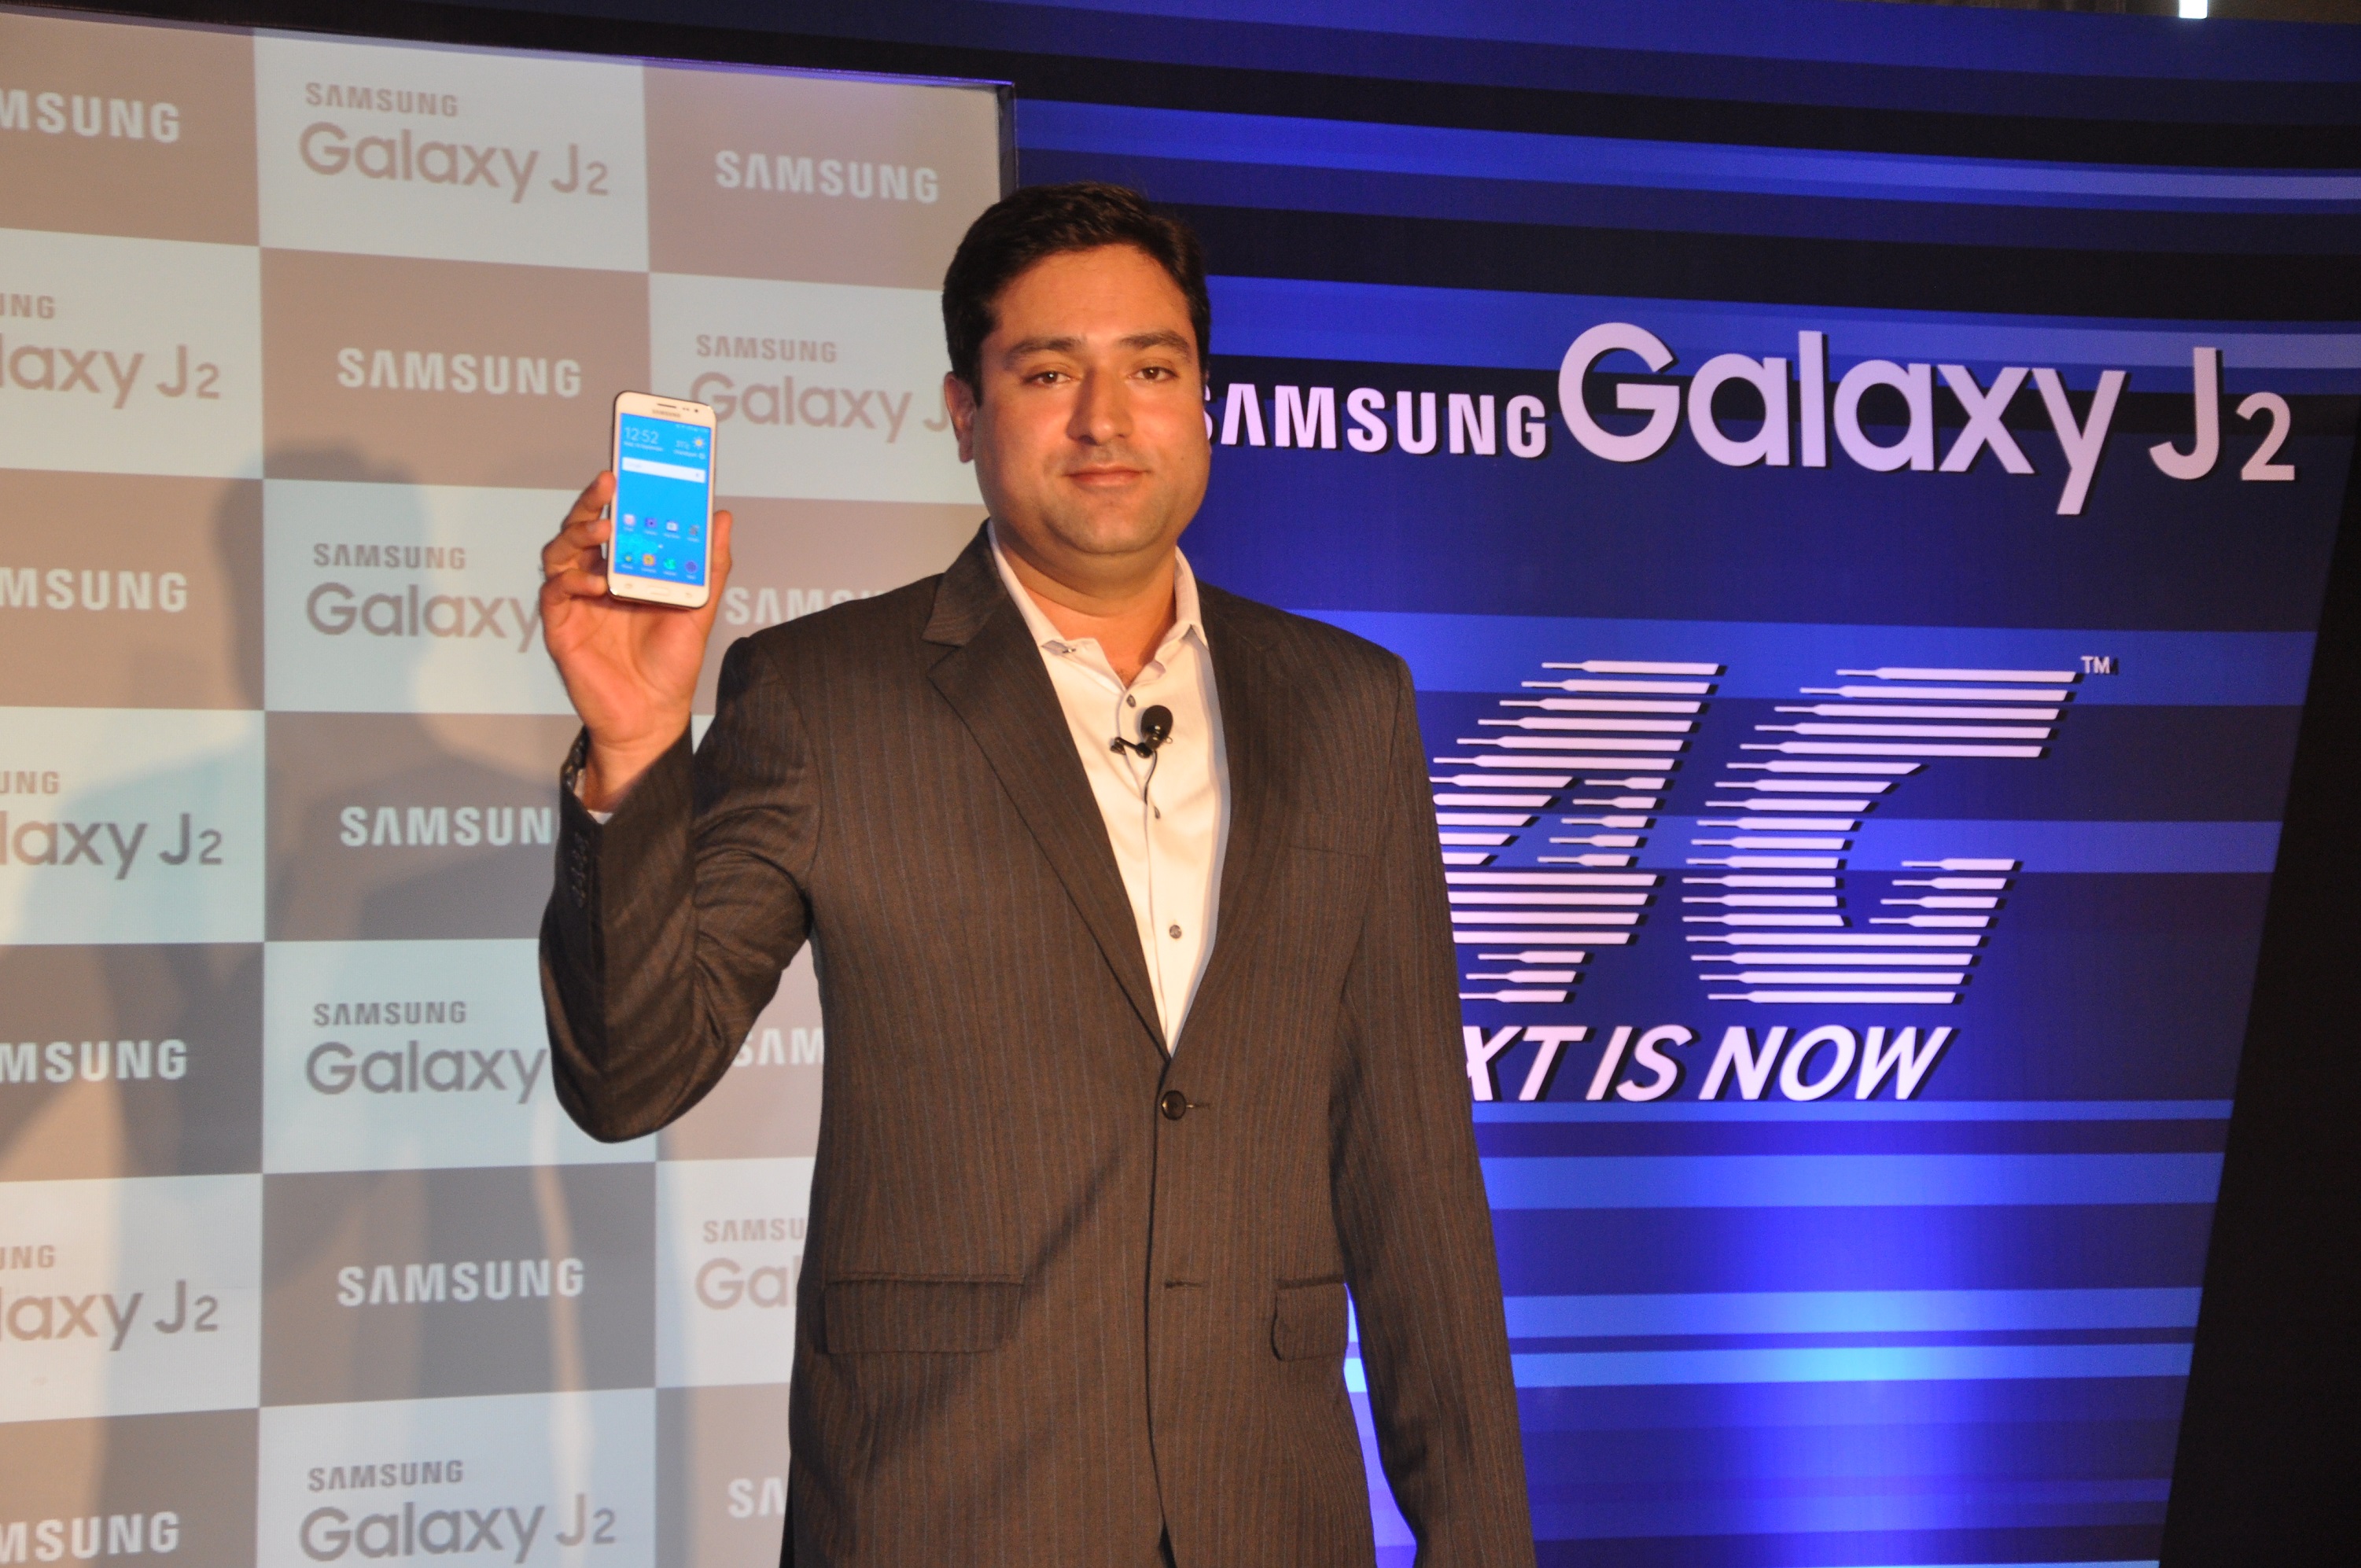 Mr. Vishal Kaul, General Manager, Mobile Business at Samsung India with Galaxy J2